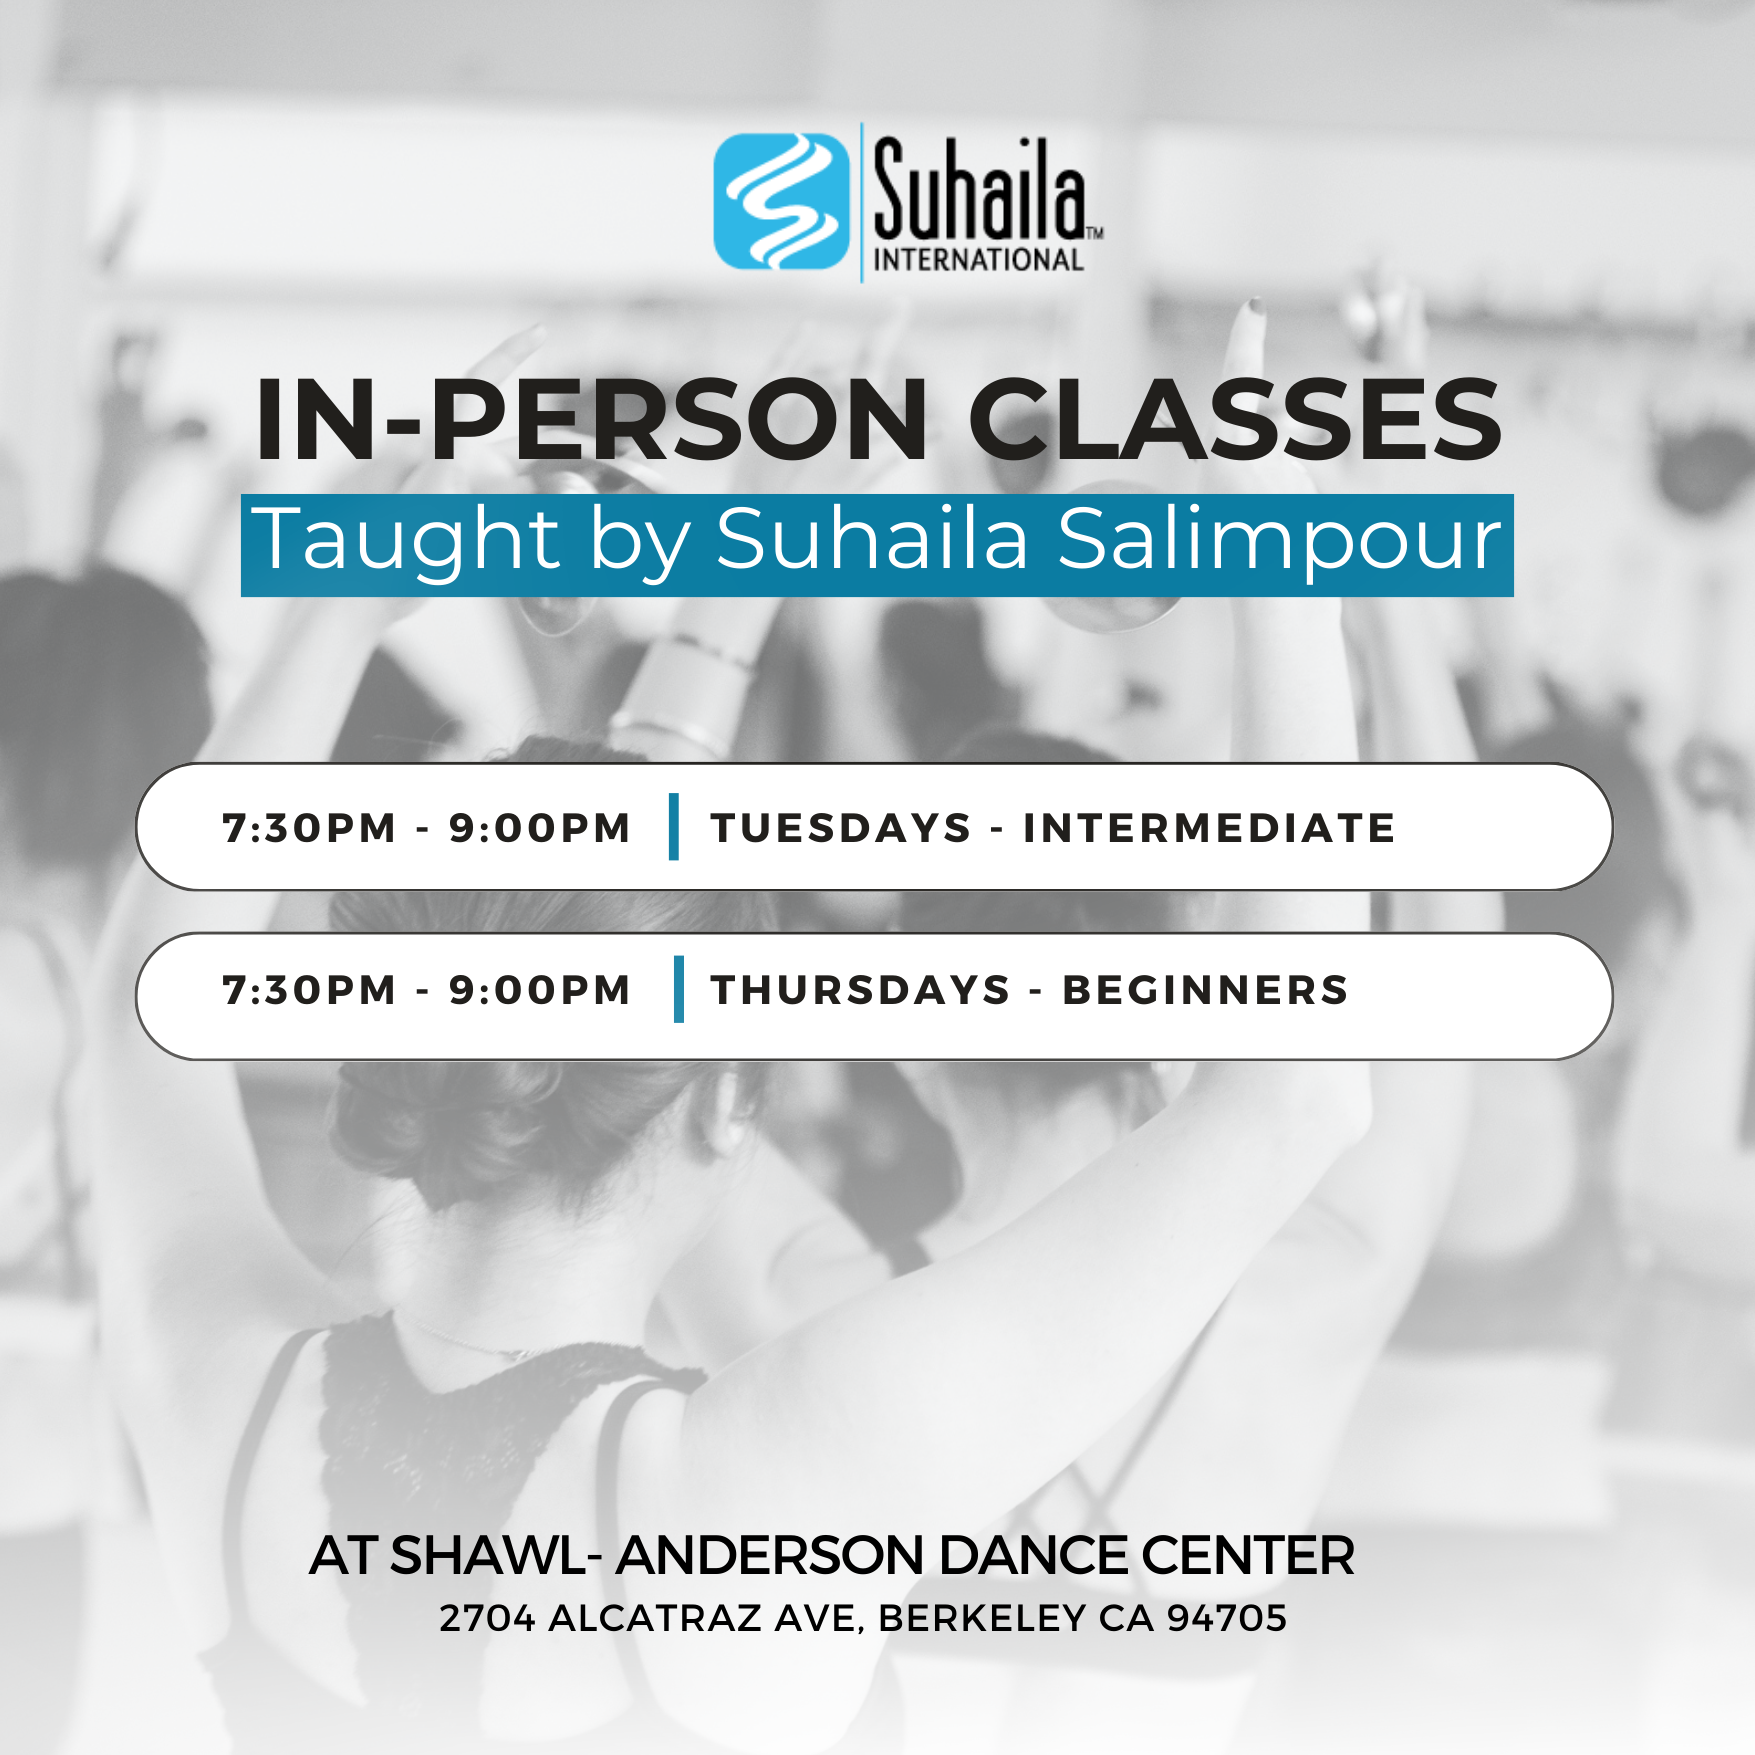 Join my in-person classes at the Shawl Anderson Dance Center in Berkeley, California